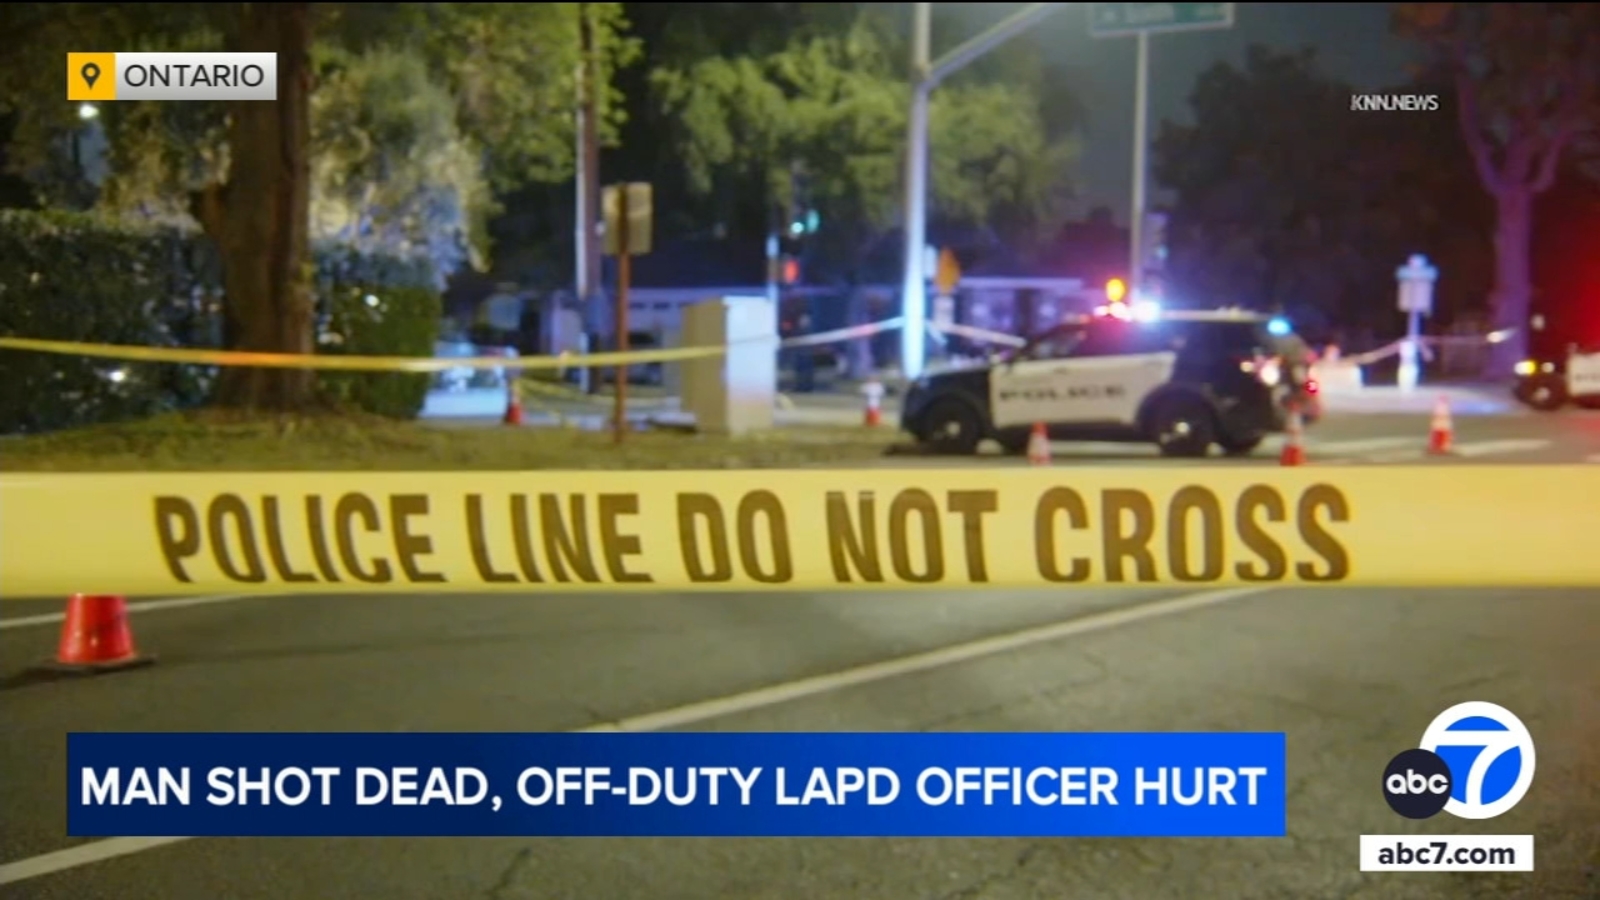 Off-duty LAPD officer involved in shooting that left man dead in Ontario, officials say [Video]